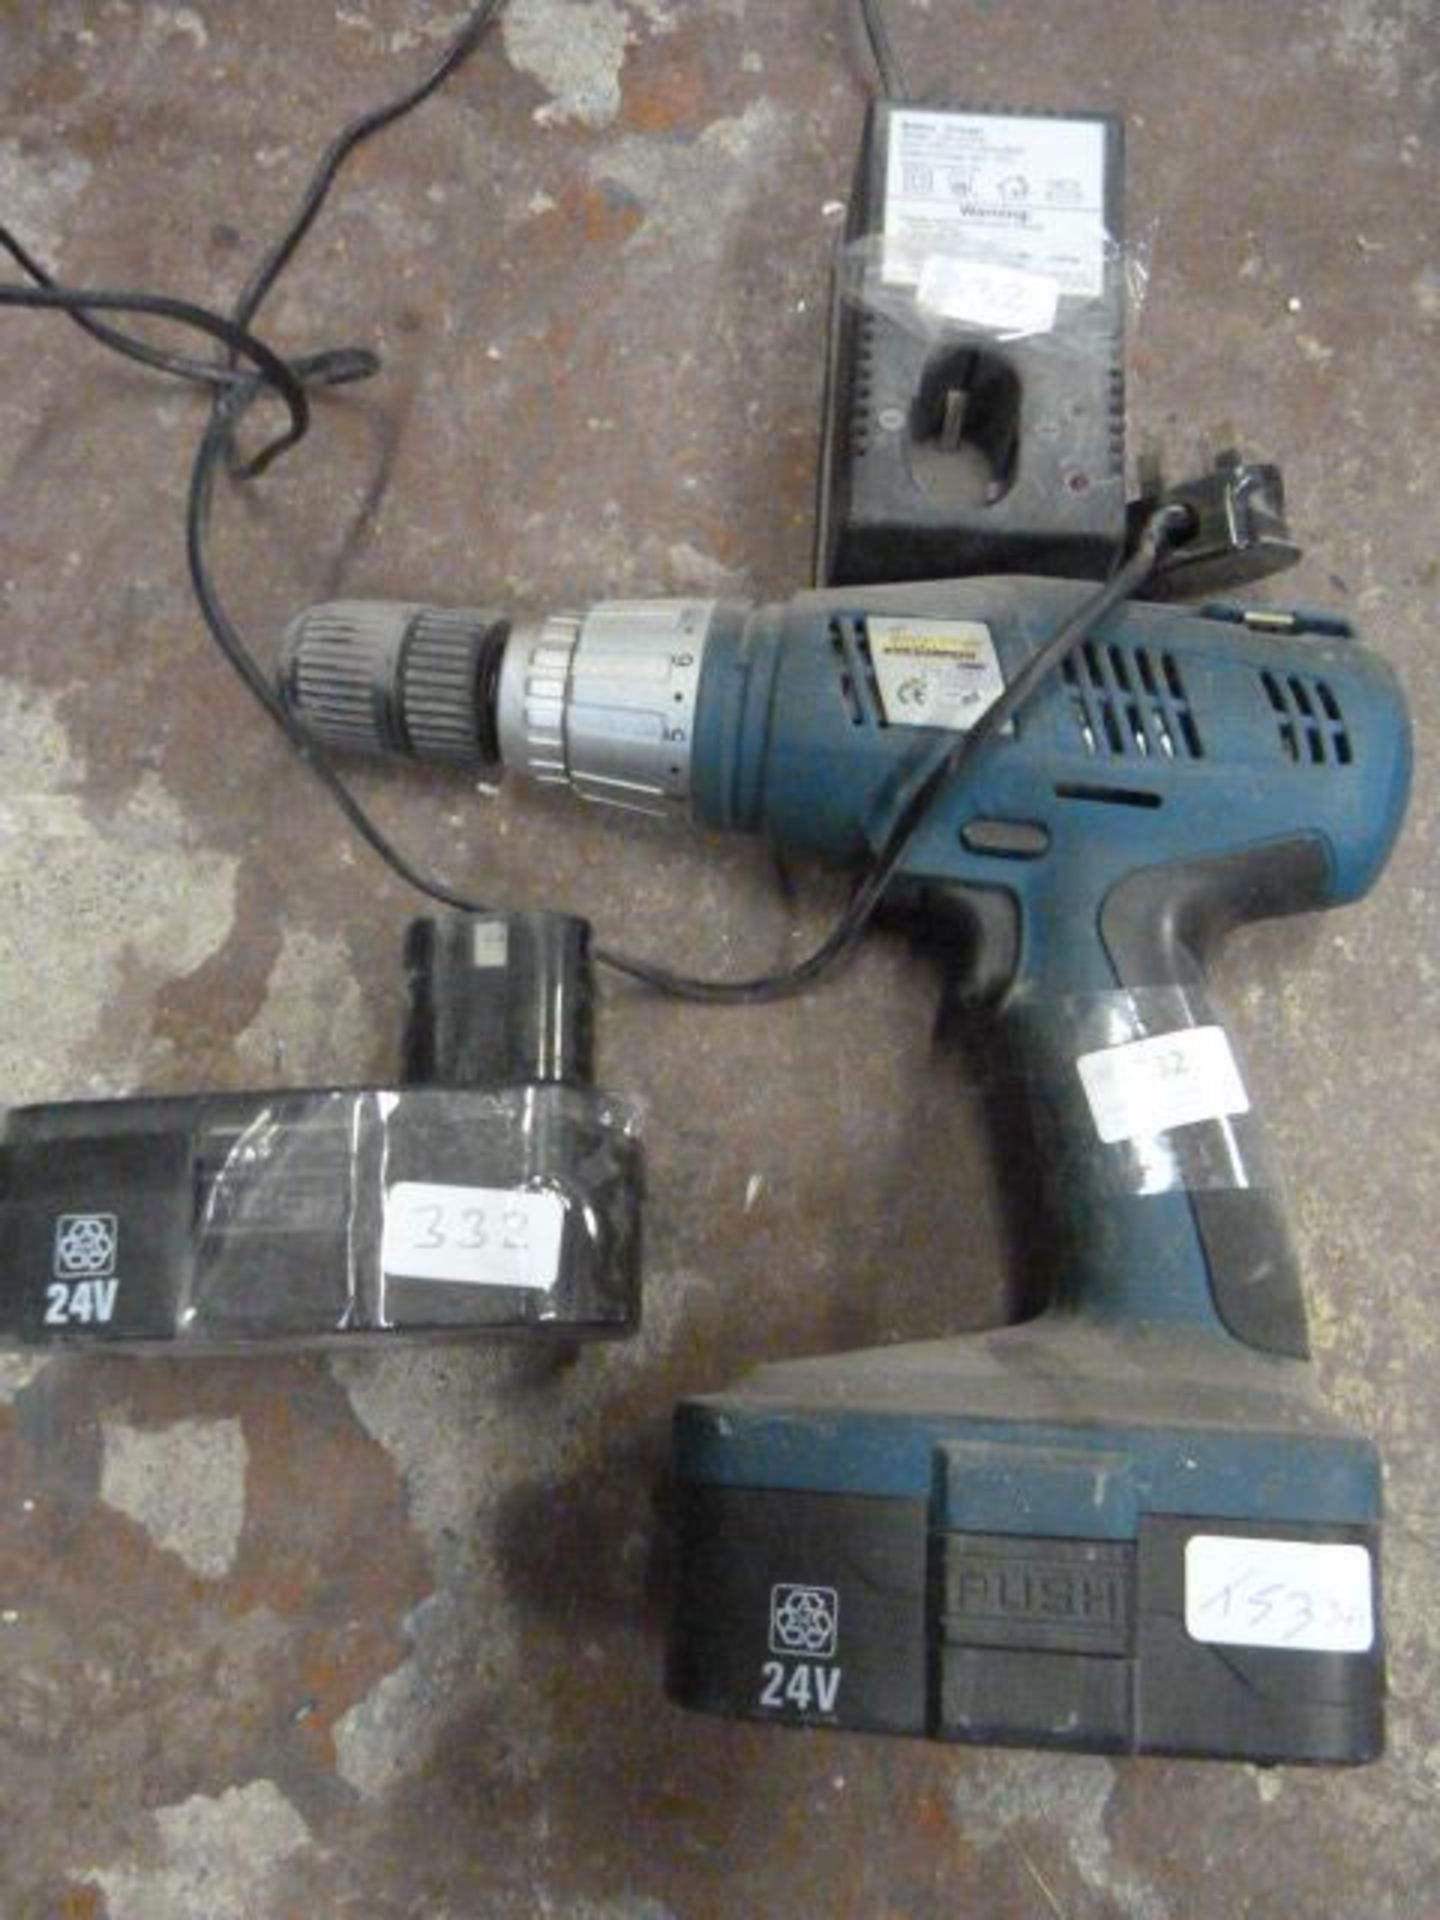 *Boschmann Cordless Drill with Spare Battery and C